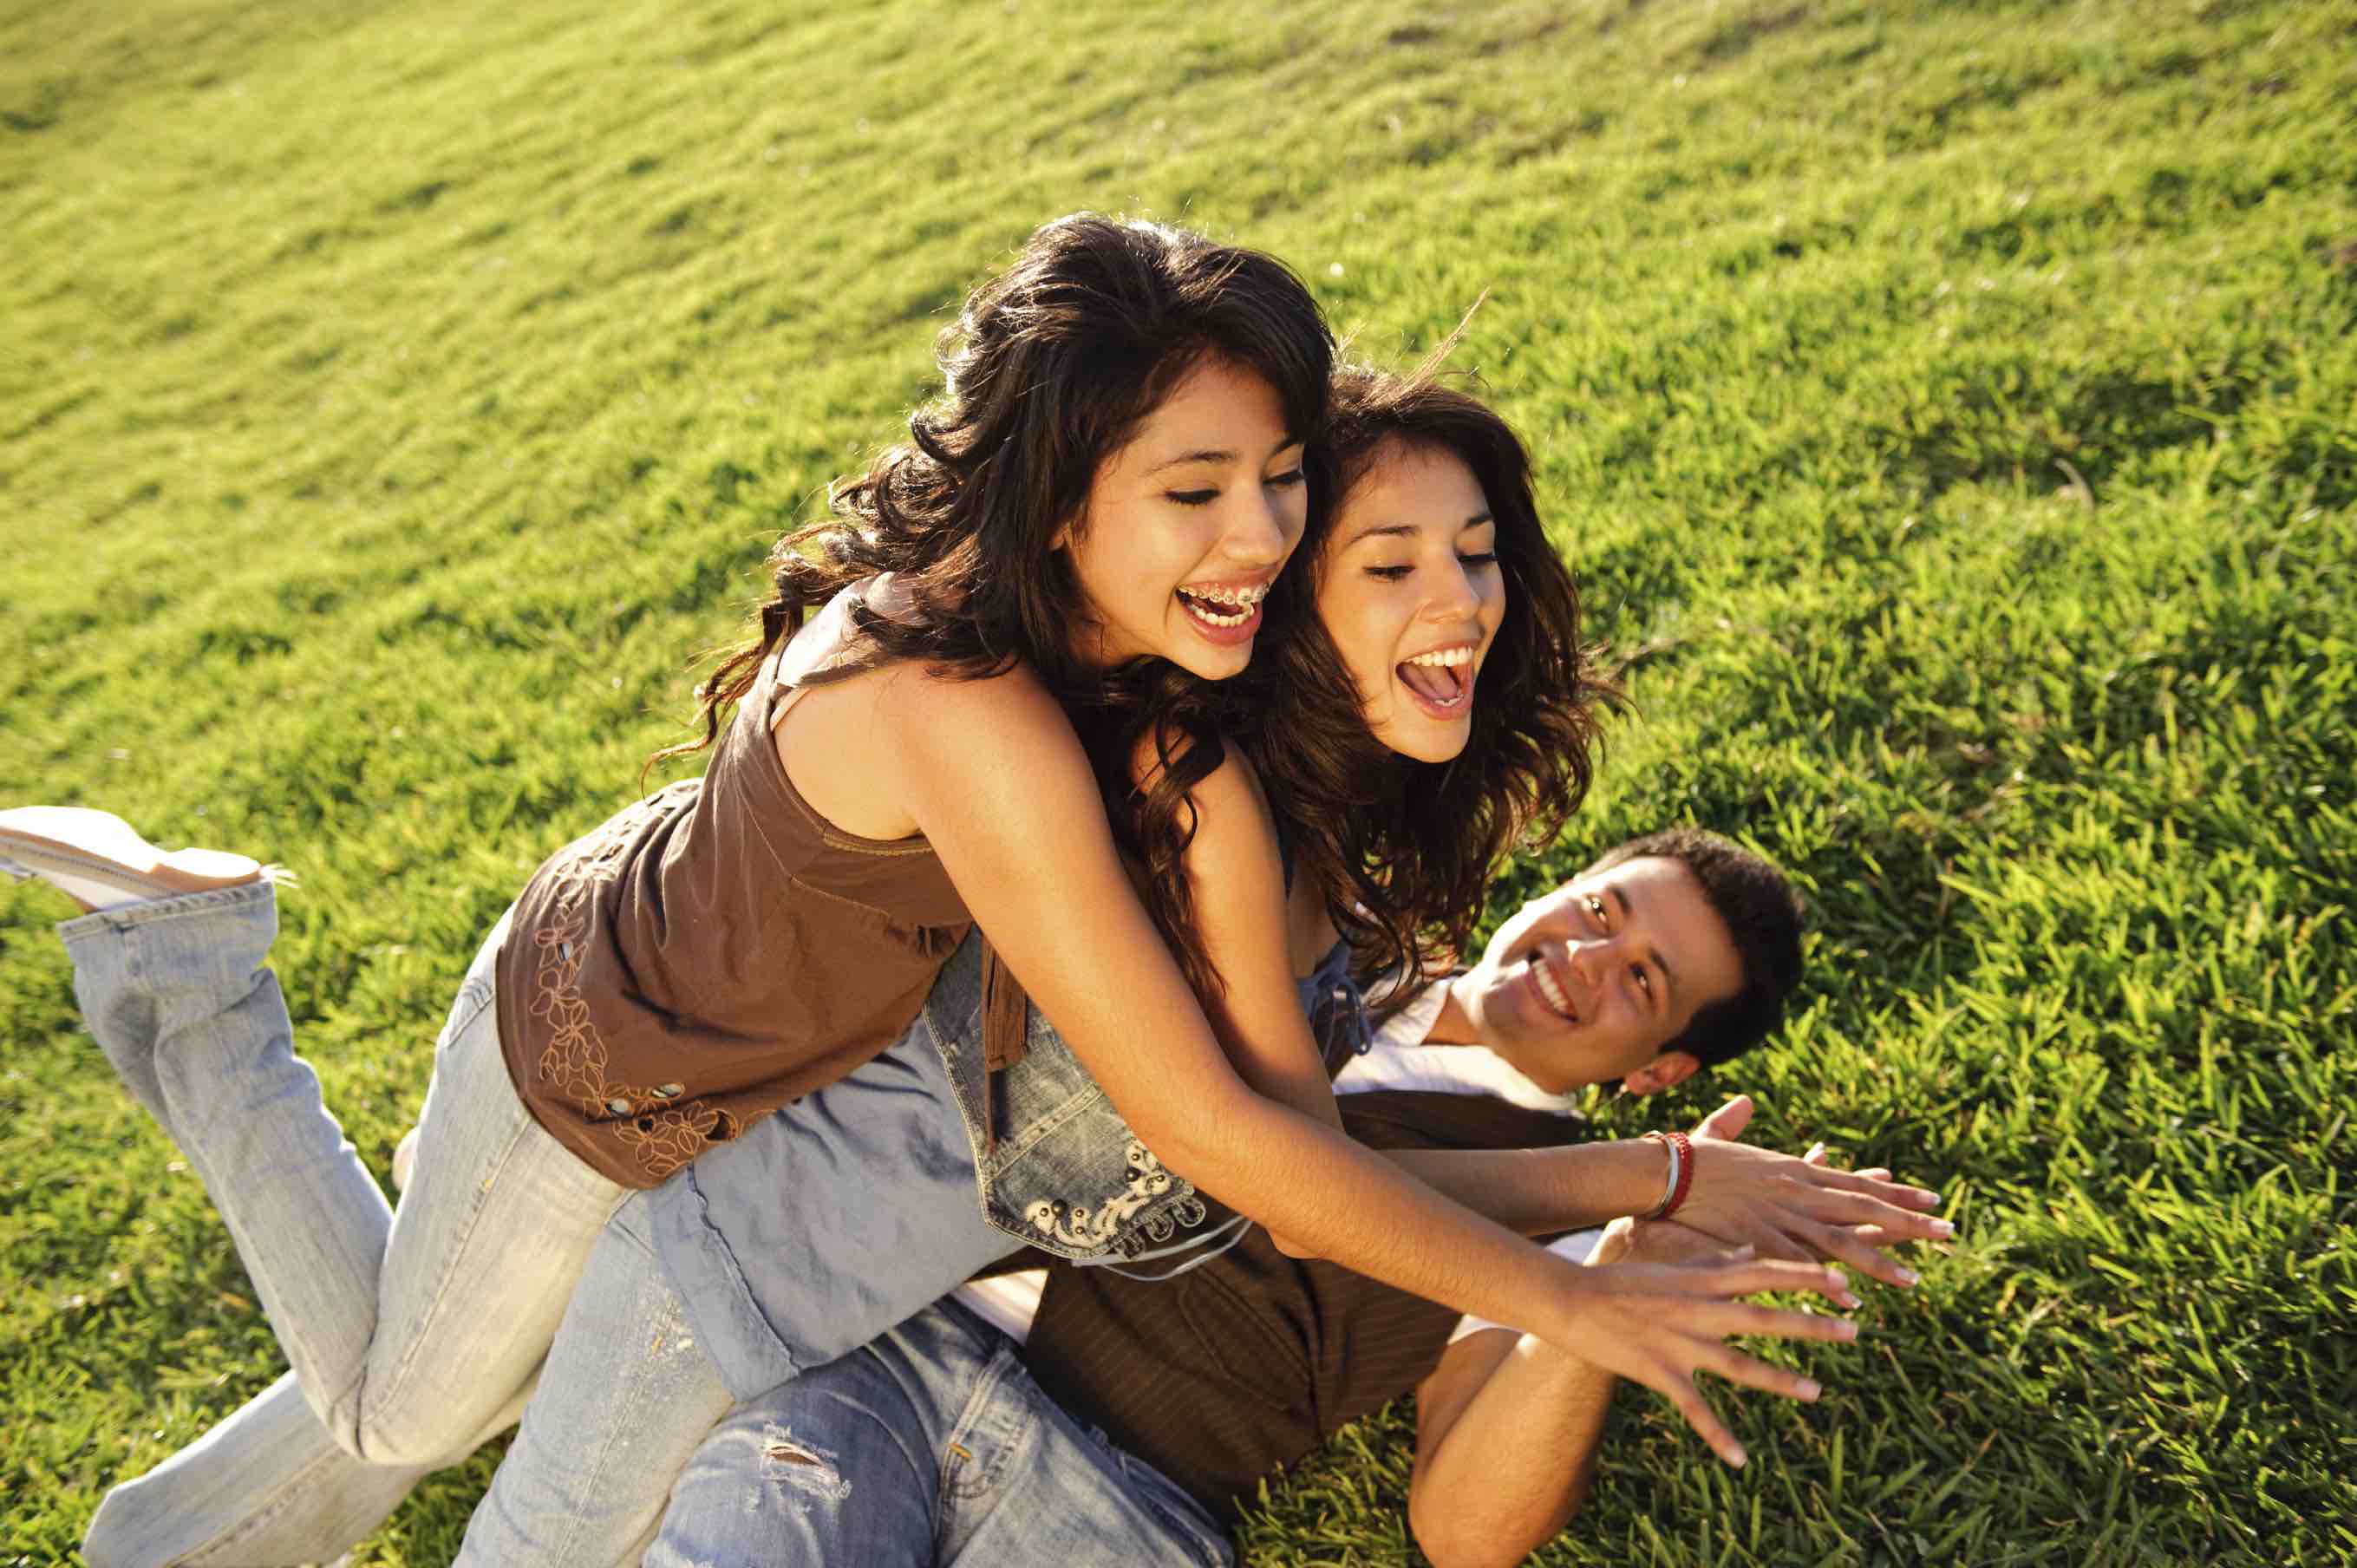 Parenting a teenager can be tricky. Try to remember teens are expected to take risks. Guide them to take the right ones.